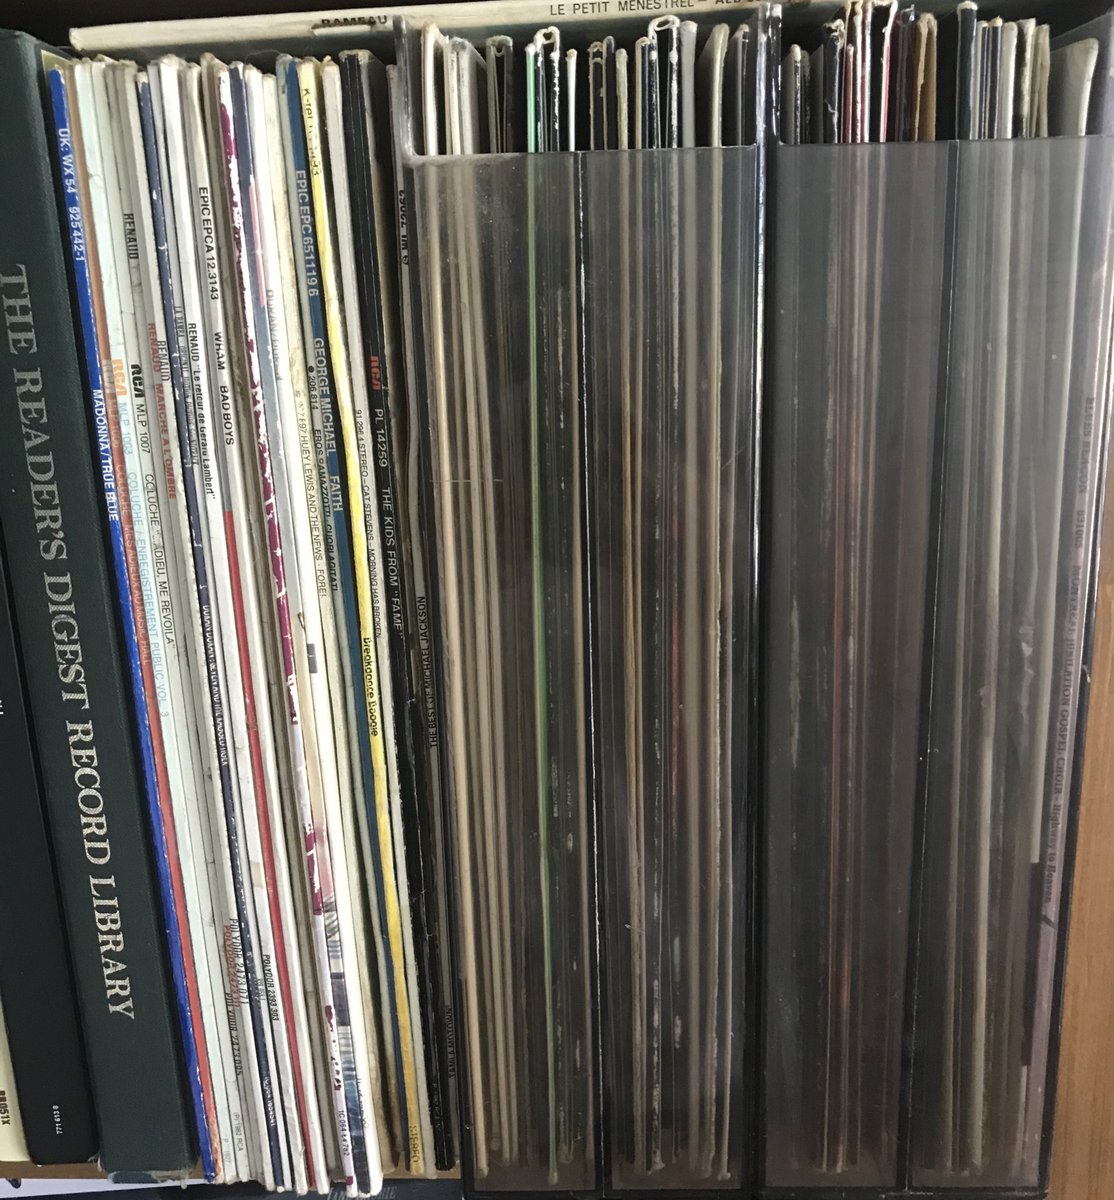 End of the thread (for the moment obviously)I’ve also a bunch of other records which belonged to my father and my grandfather but I don’t put them in this thread.(a picture of what they look in my shelf below)